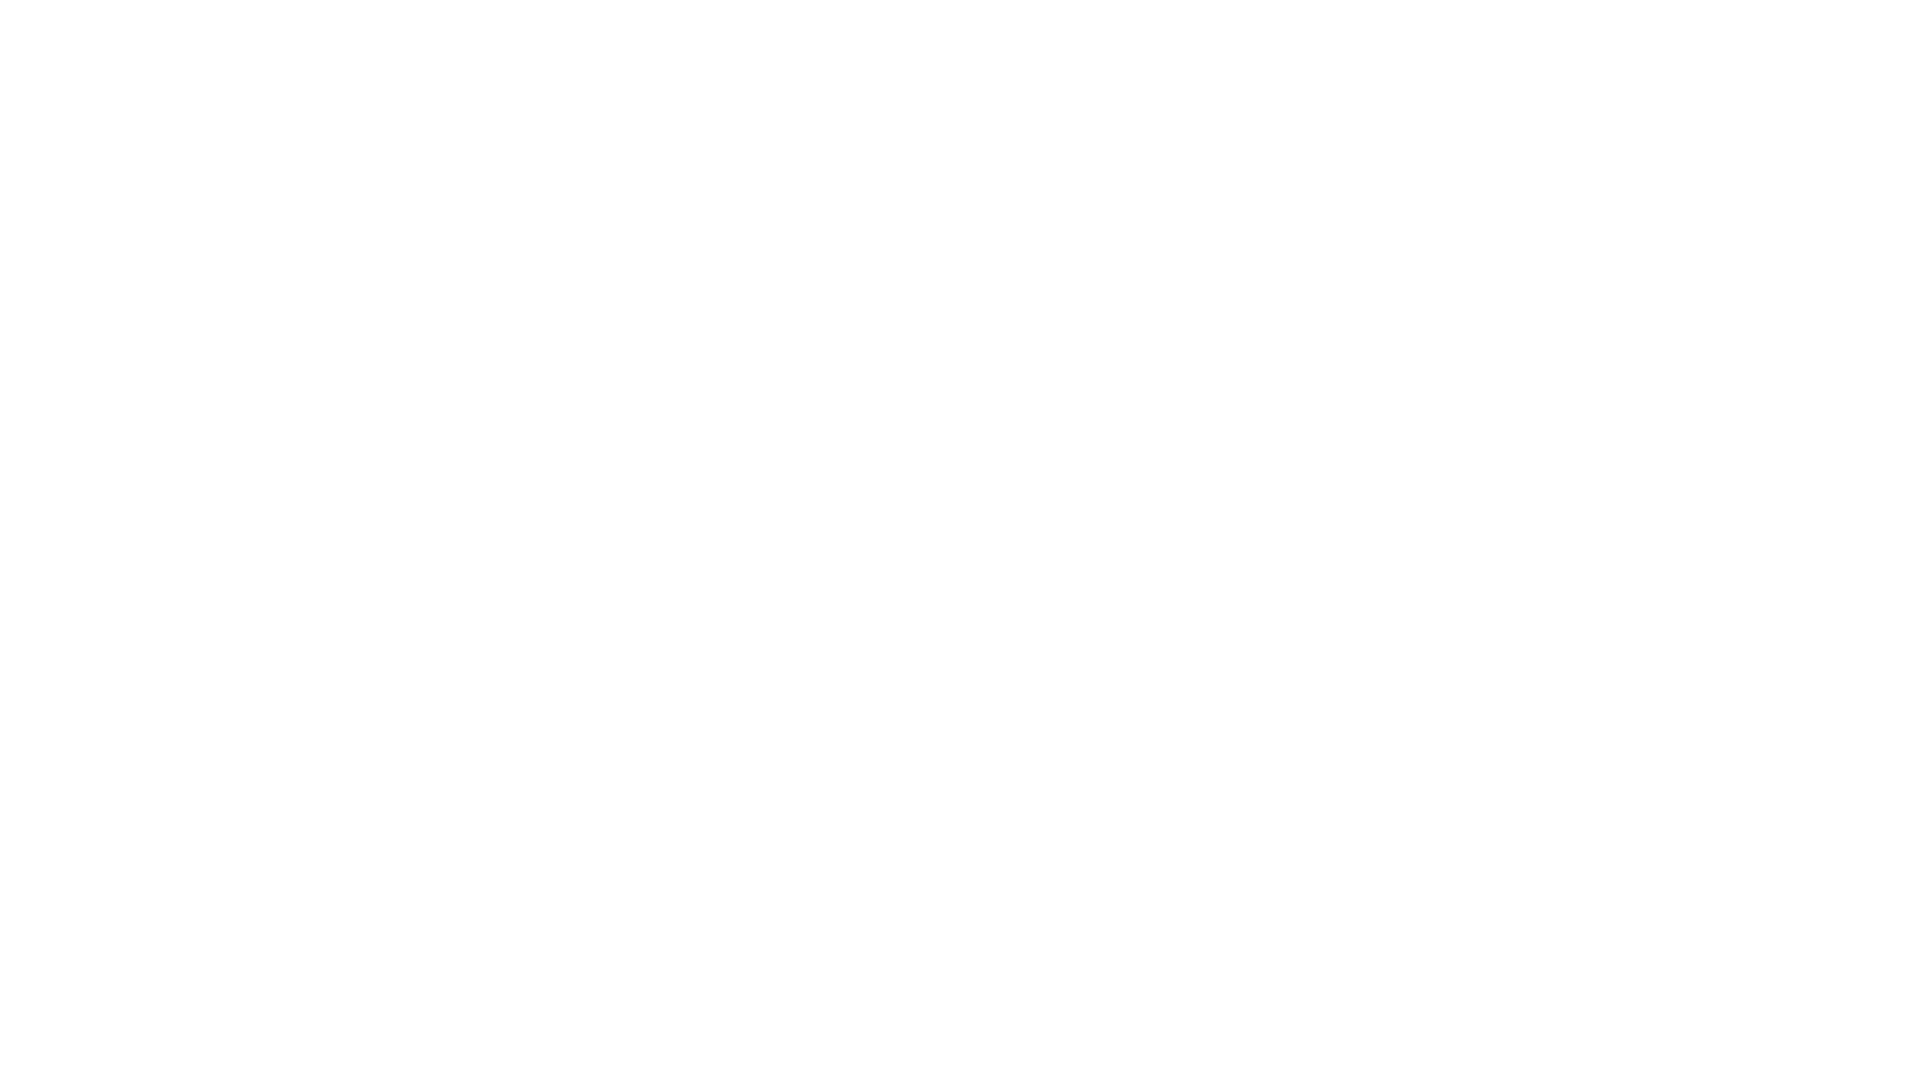 THE LIGHT HOUSE AND THE WEEKENDS, YOU AND HIM